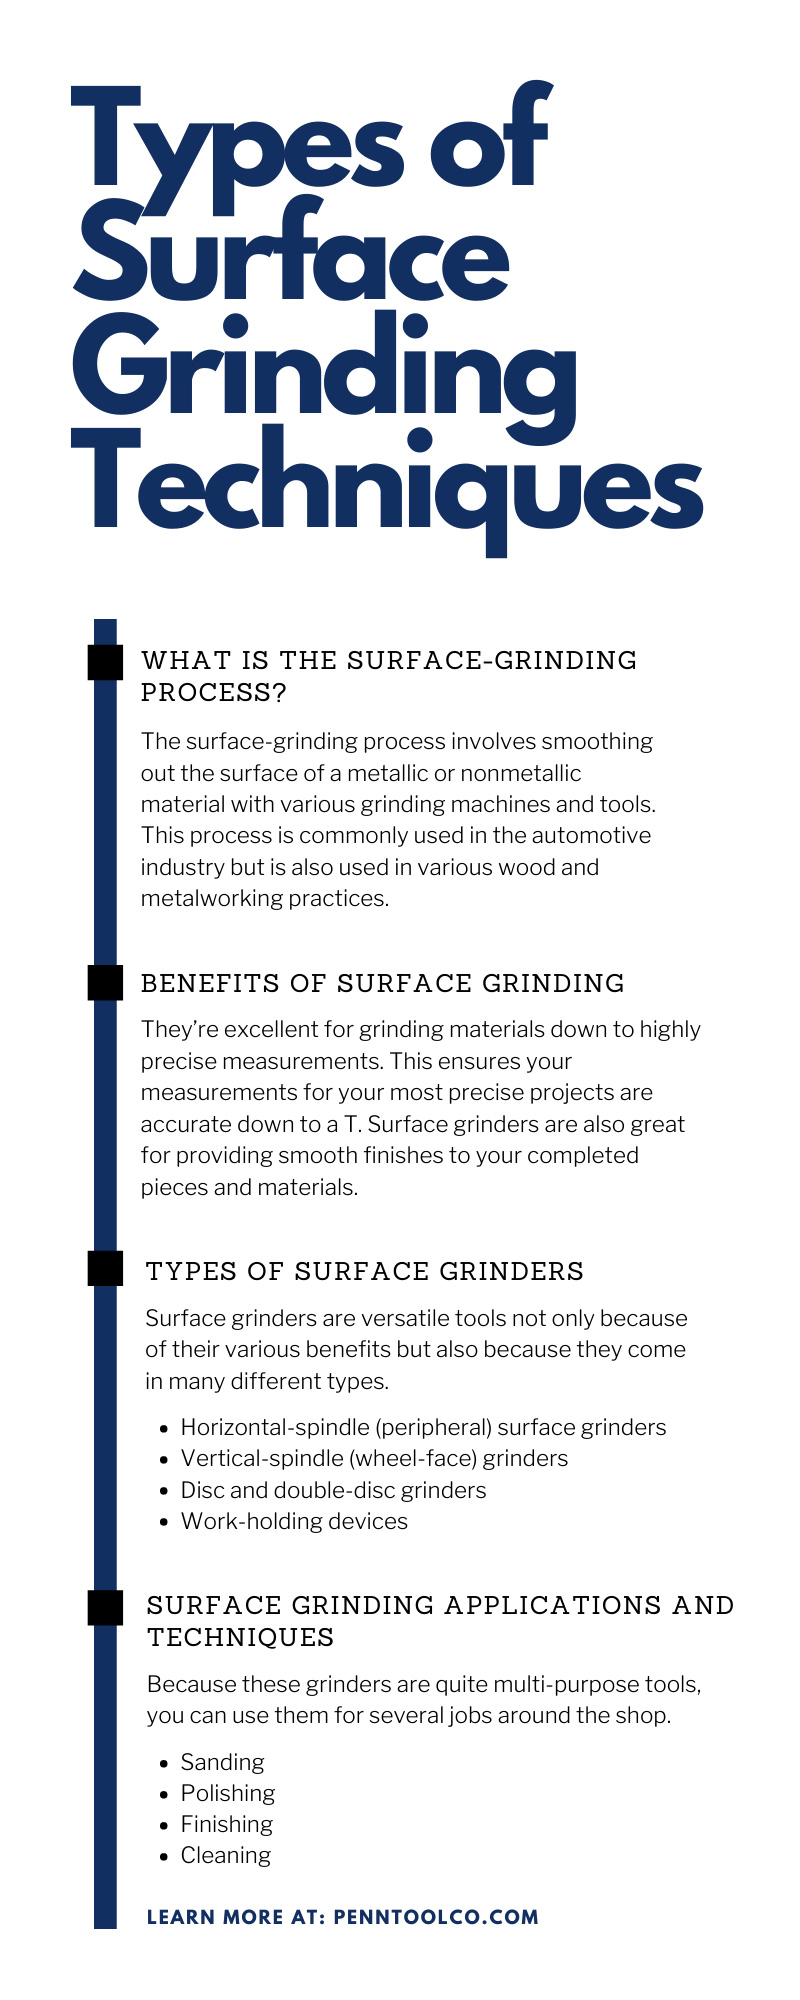 Types of Surface Grinding Techniques